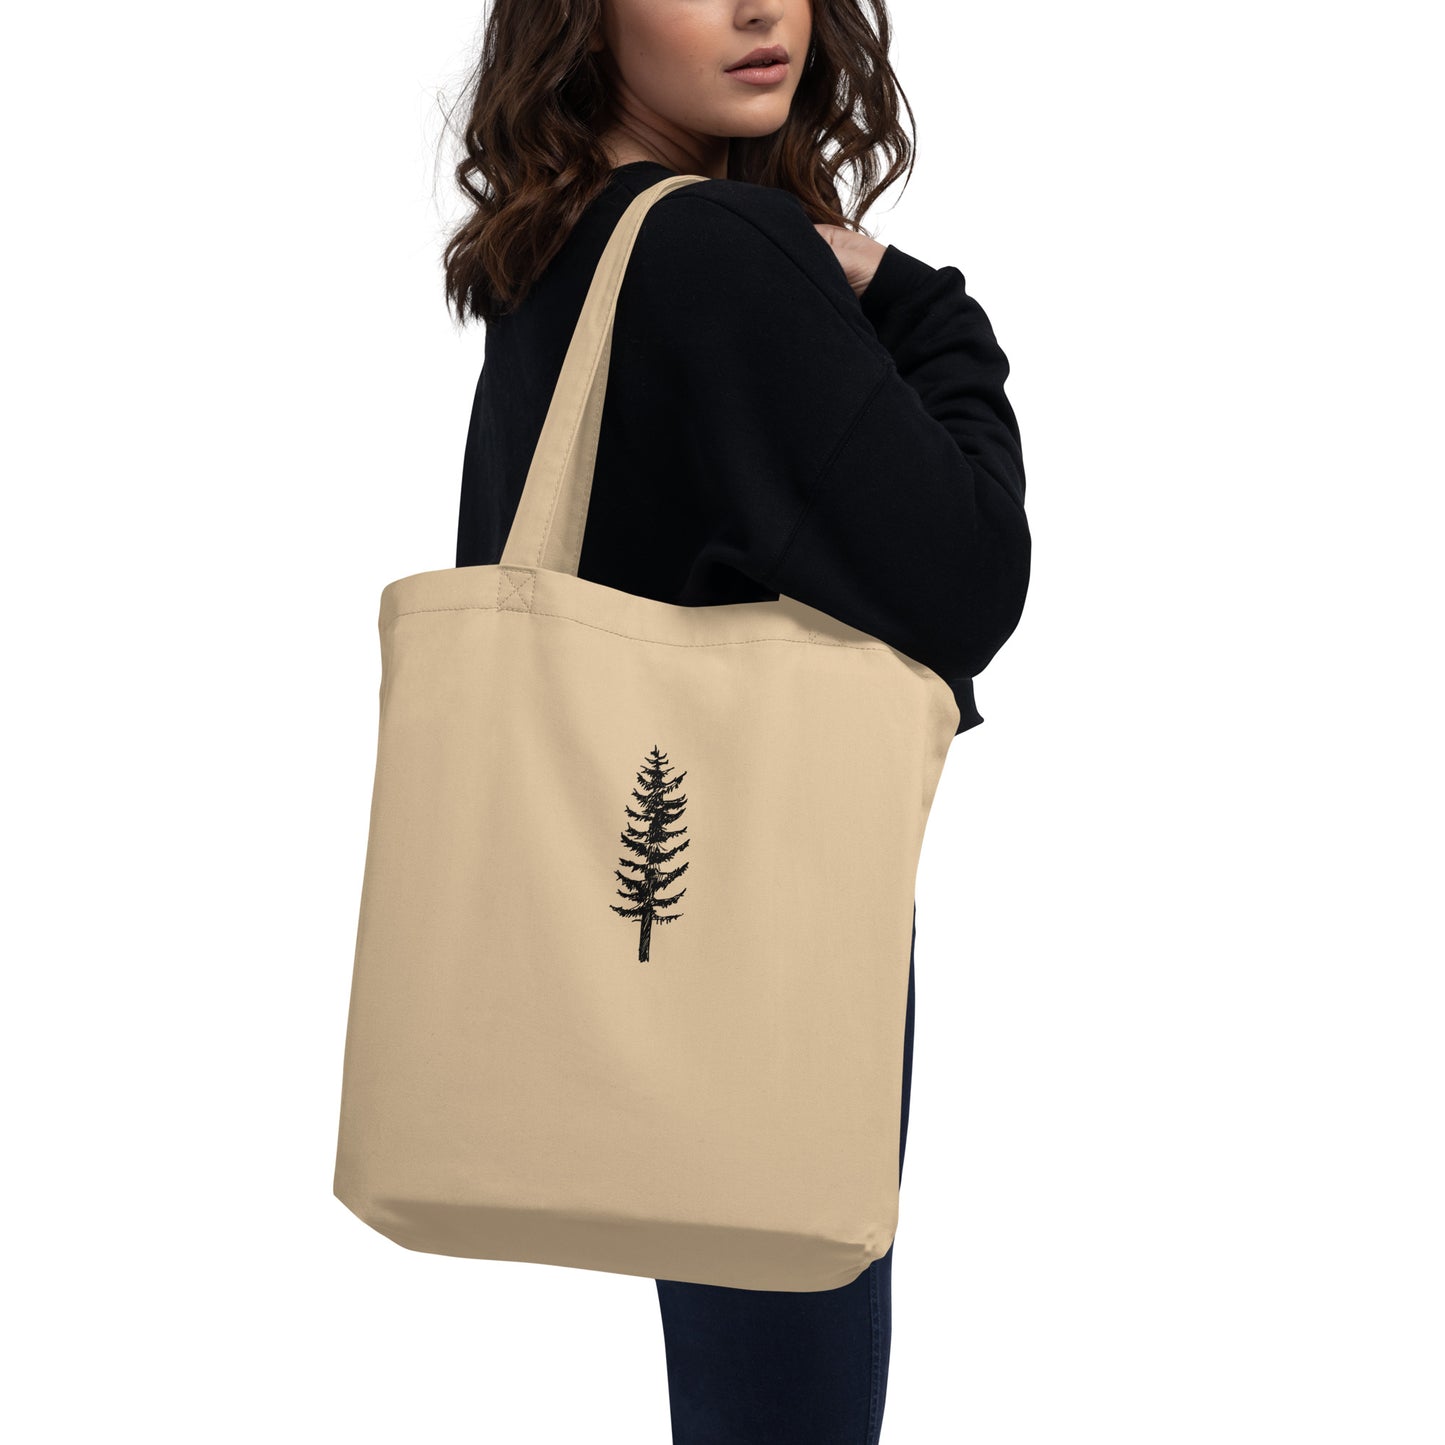 Wolf Face Eco Tote Bag